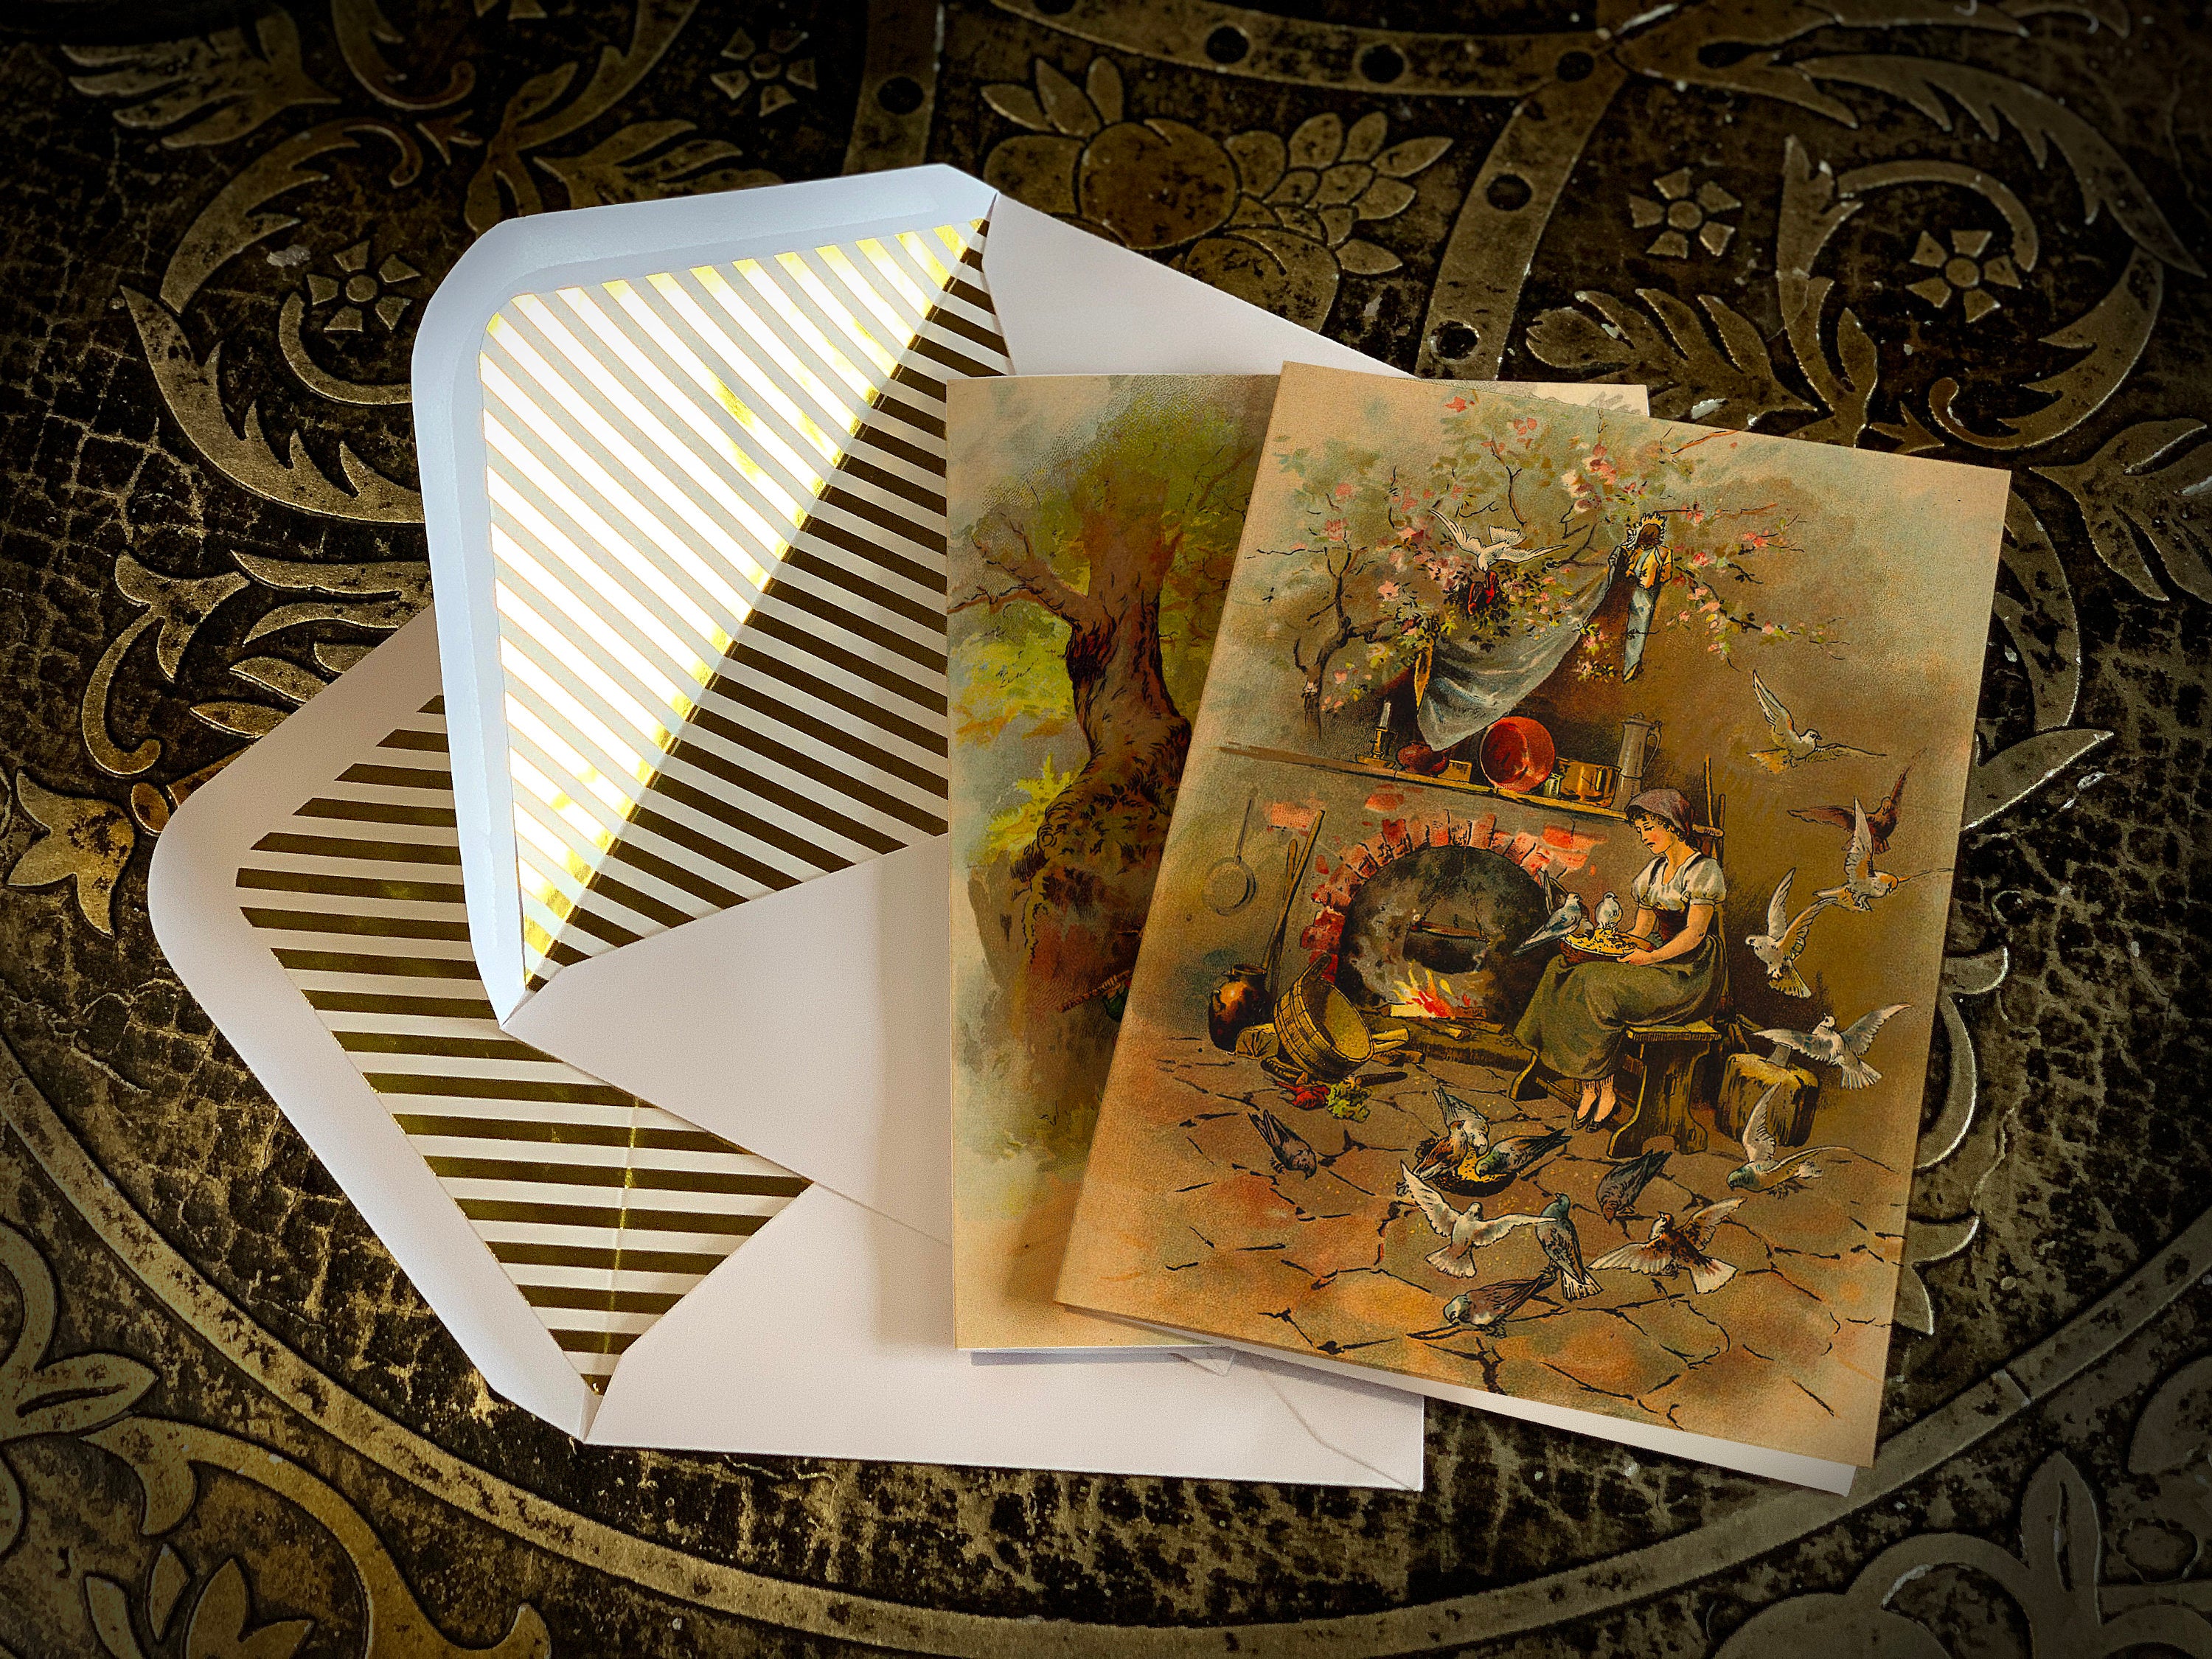 Five Classic Grimm Fairytales, Everyday Greeting Cards with Elegant Striped Gold Foil Envelopes, 5in x 7in, Set of 5 Cards/Envelopes